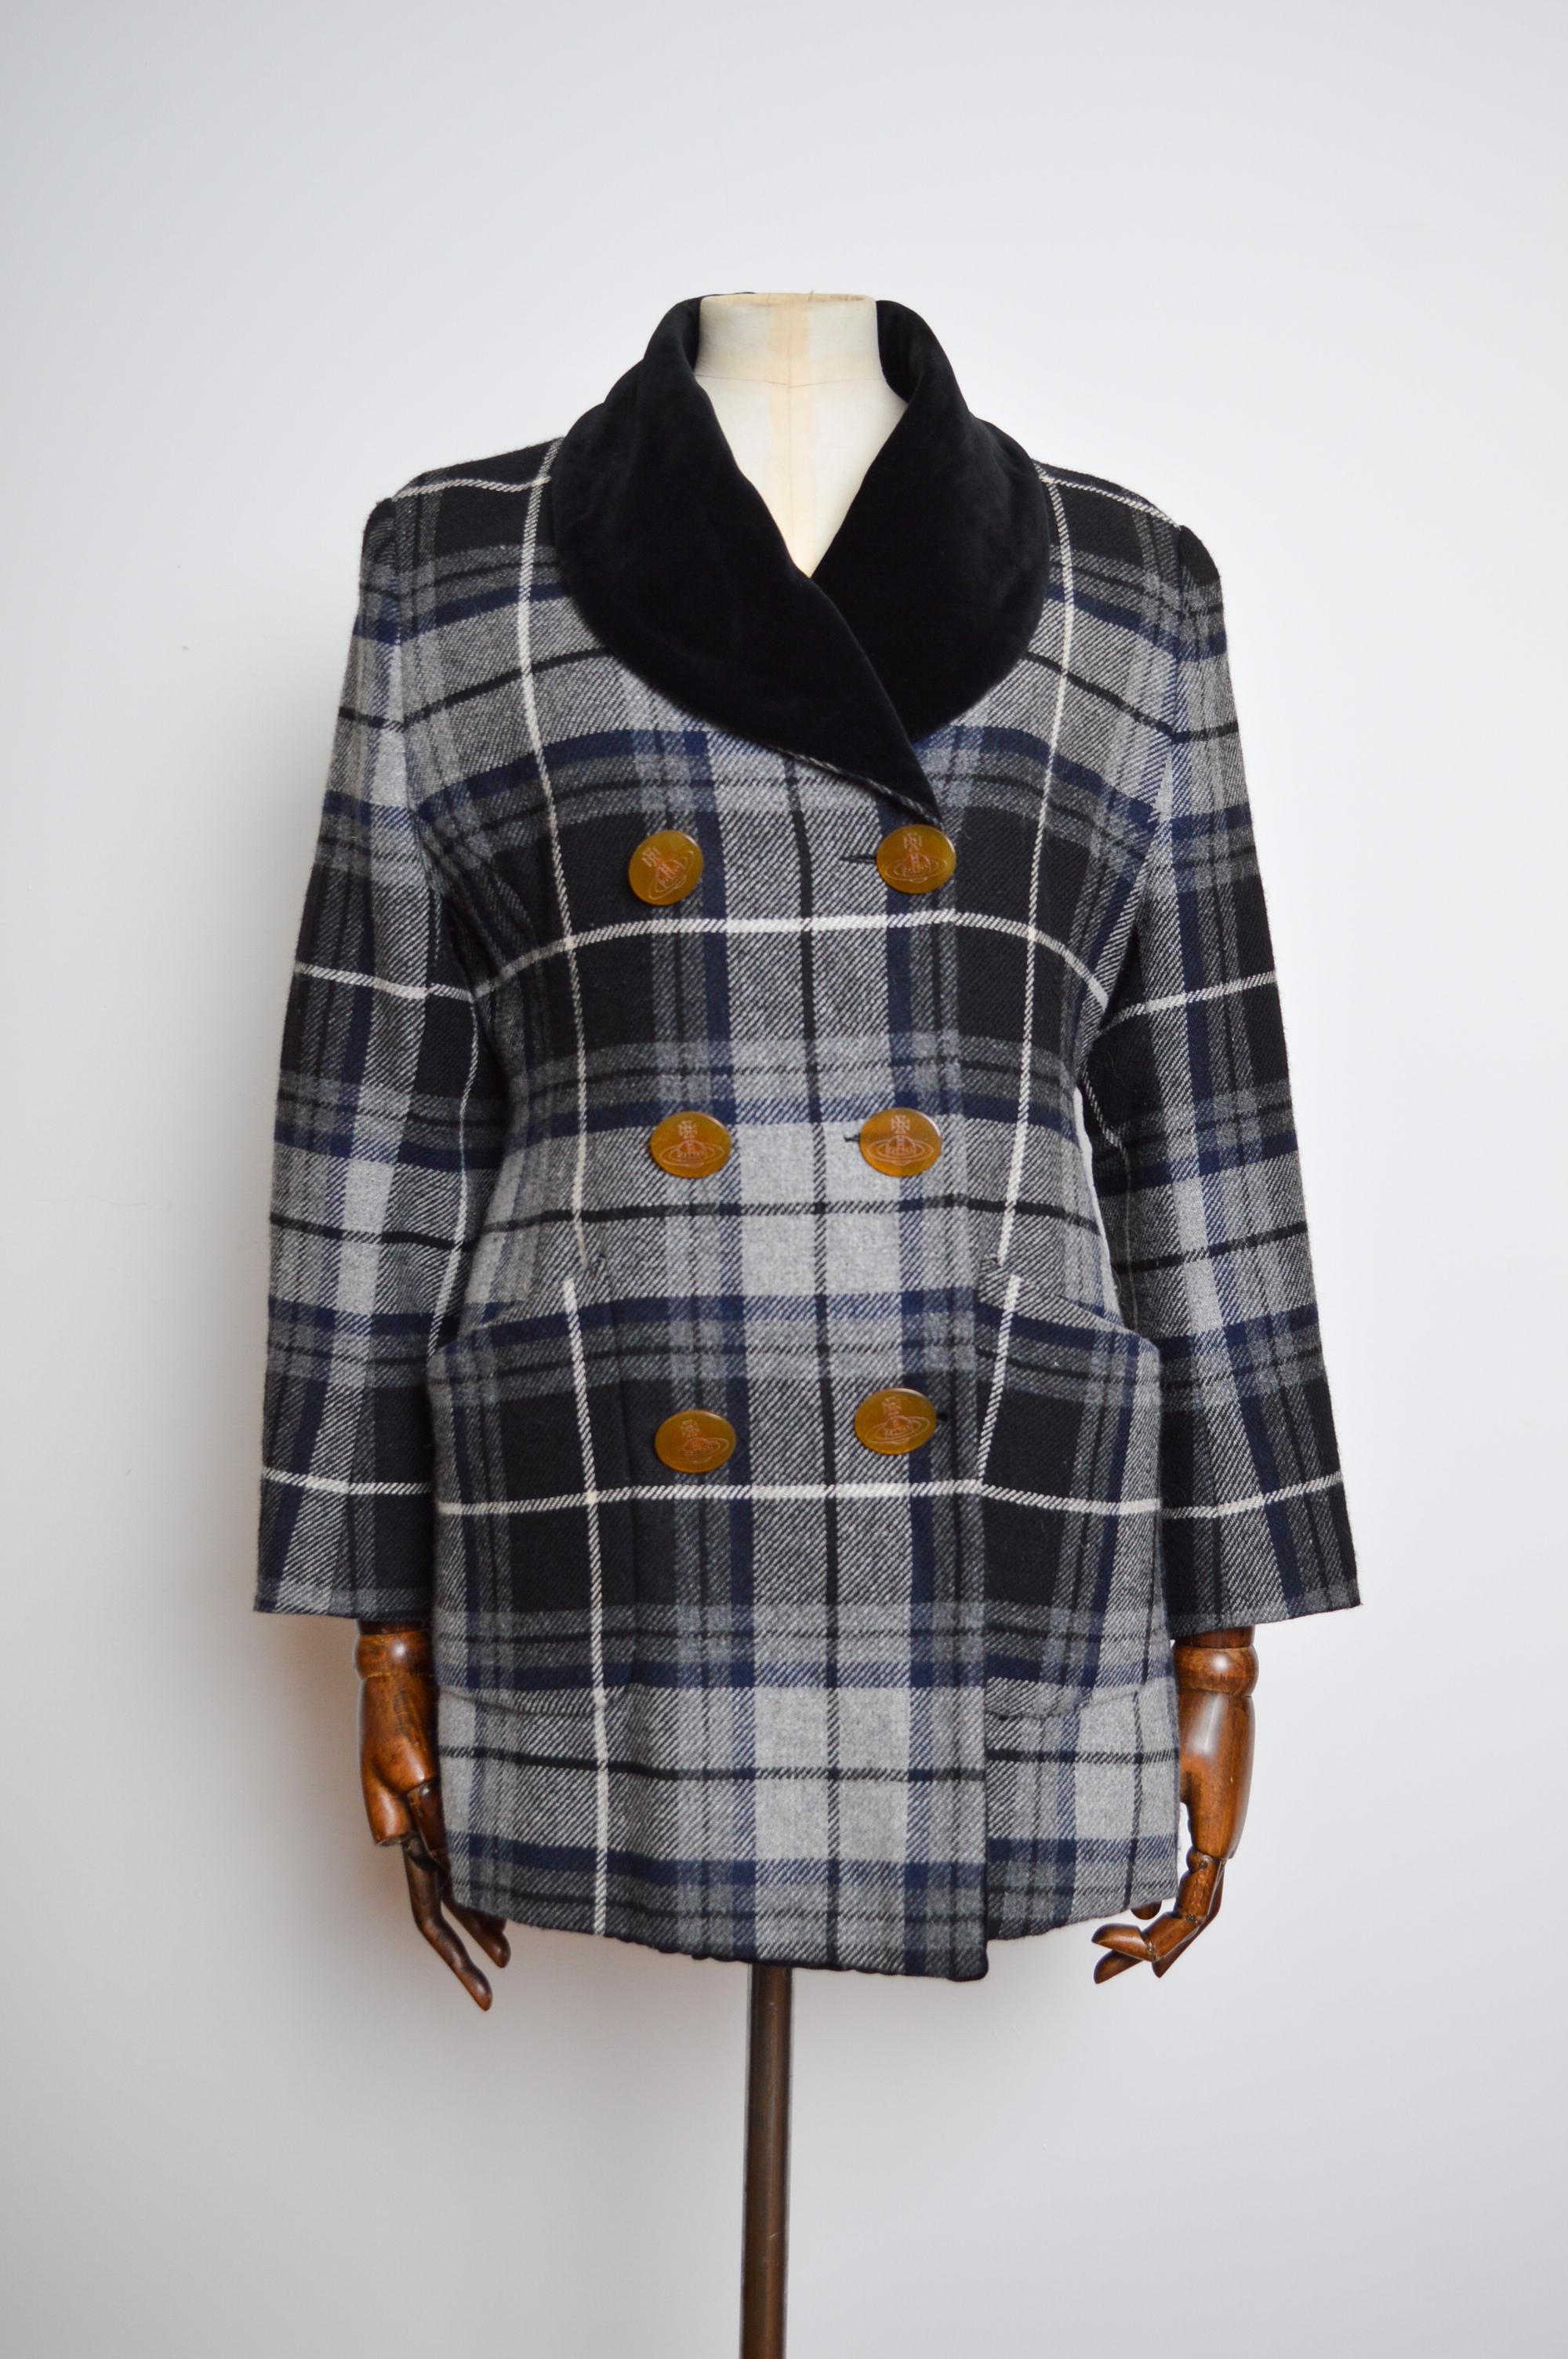 Rare Vivienne Westwood 3 Suisses AW 1995/ 1996 Collab Checked Tartan Wool Coat  In Good Condition For Sale In Sheffield, GB